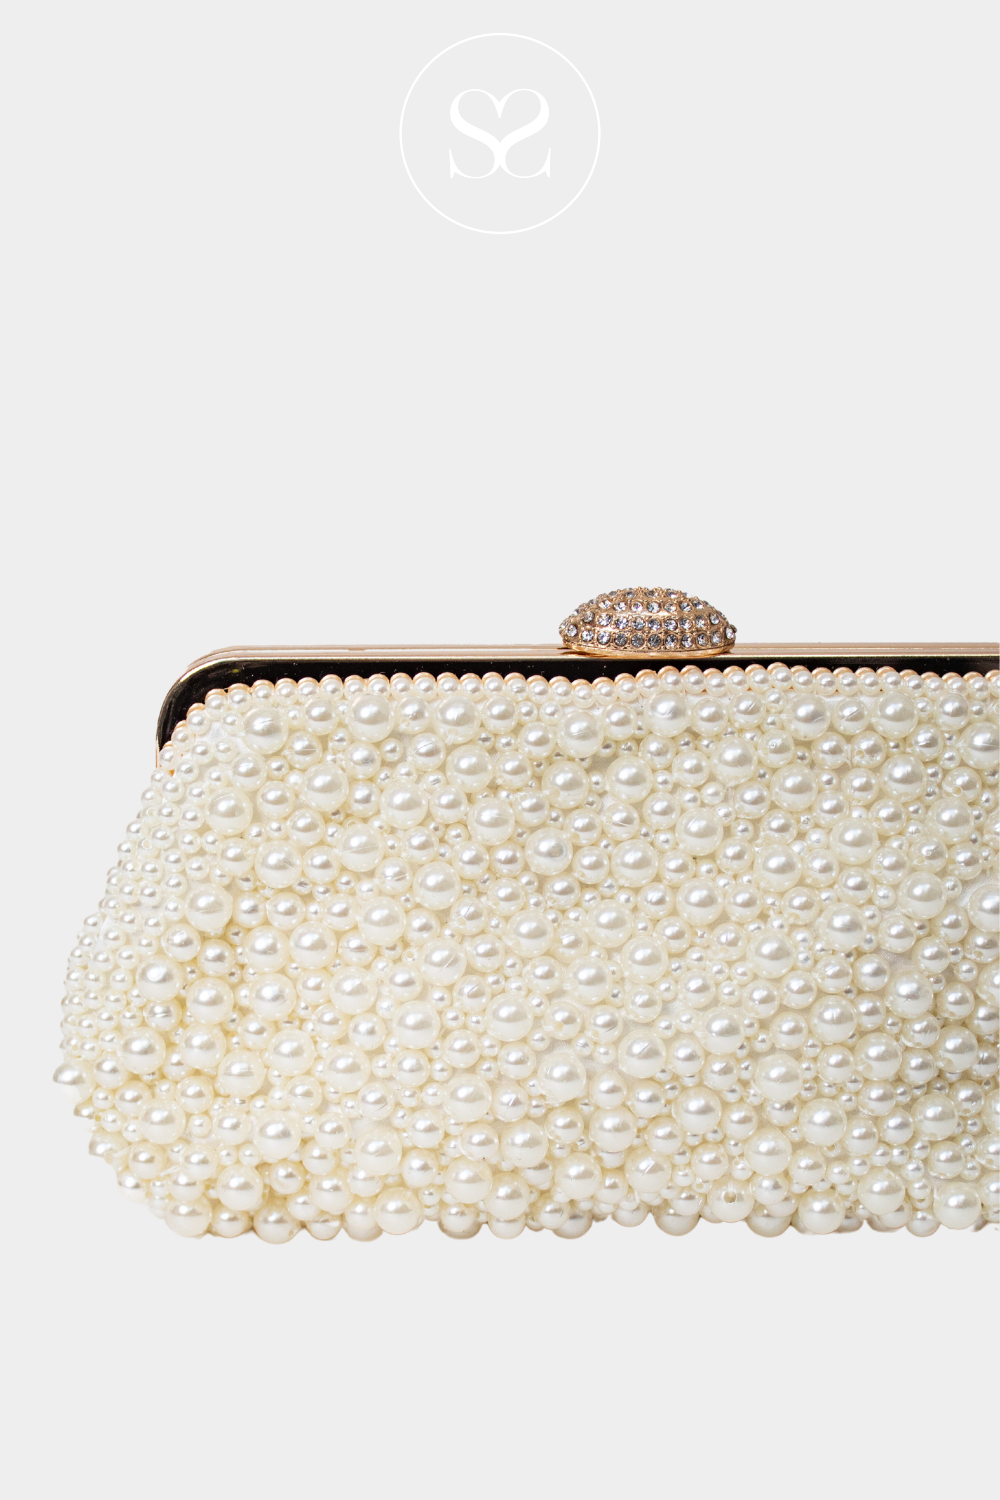 SHENEIL 4553 IVORY CREAM PEARL CLUTCH OCCASSION PARTYWEAR BAG WITH CLASP